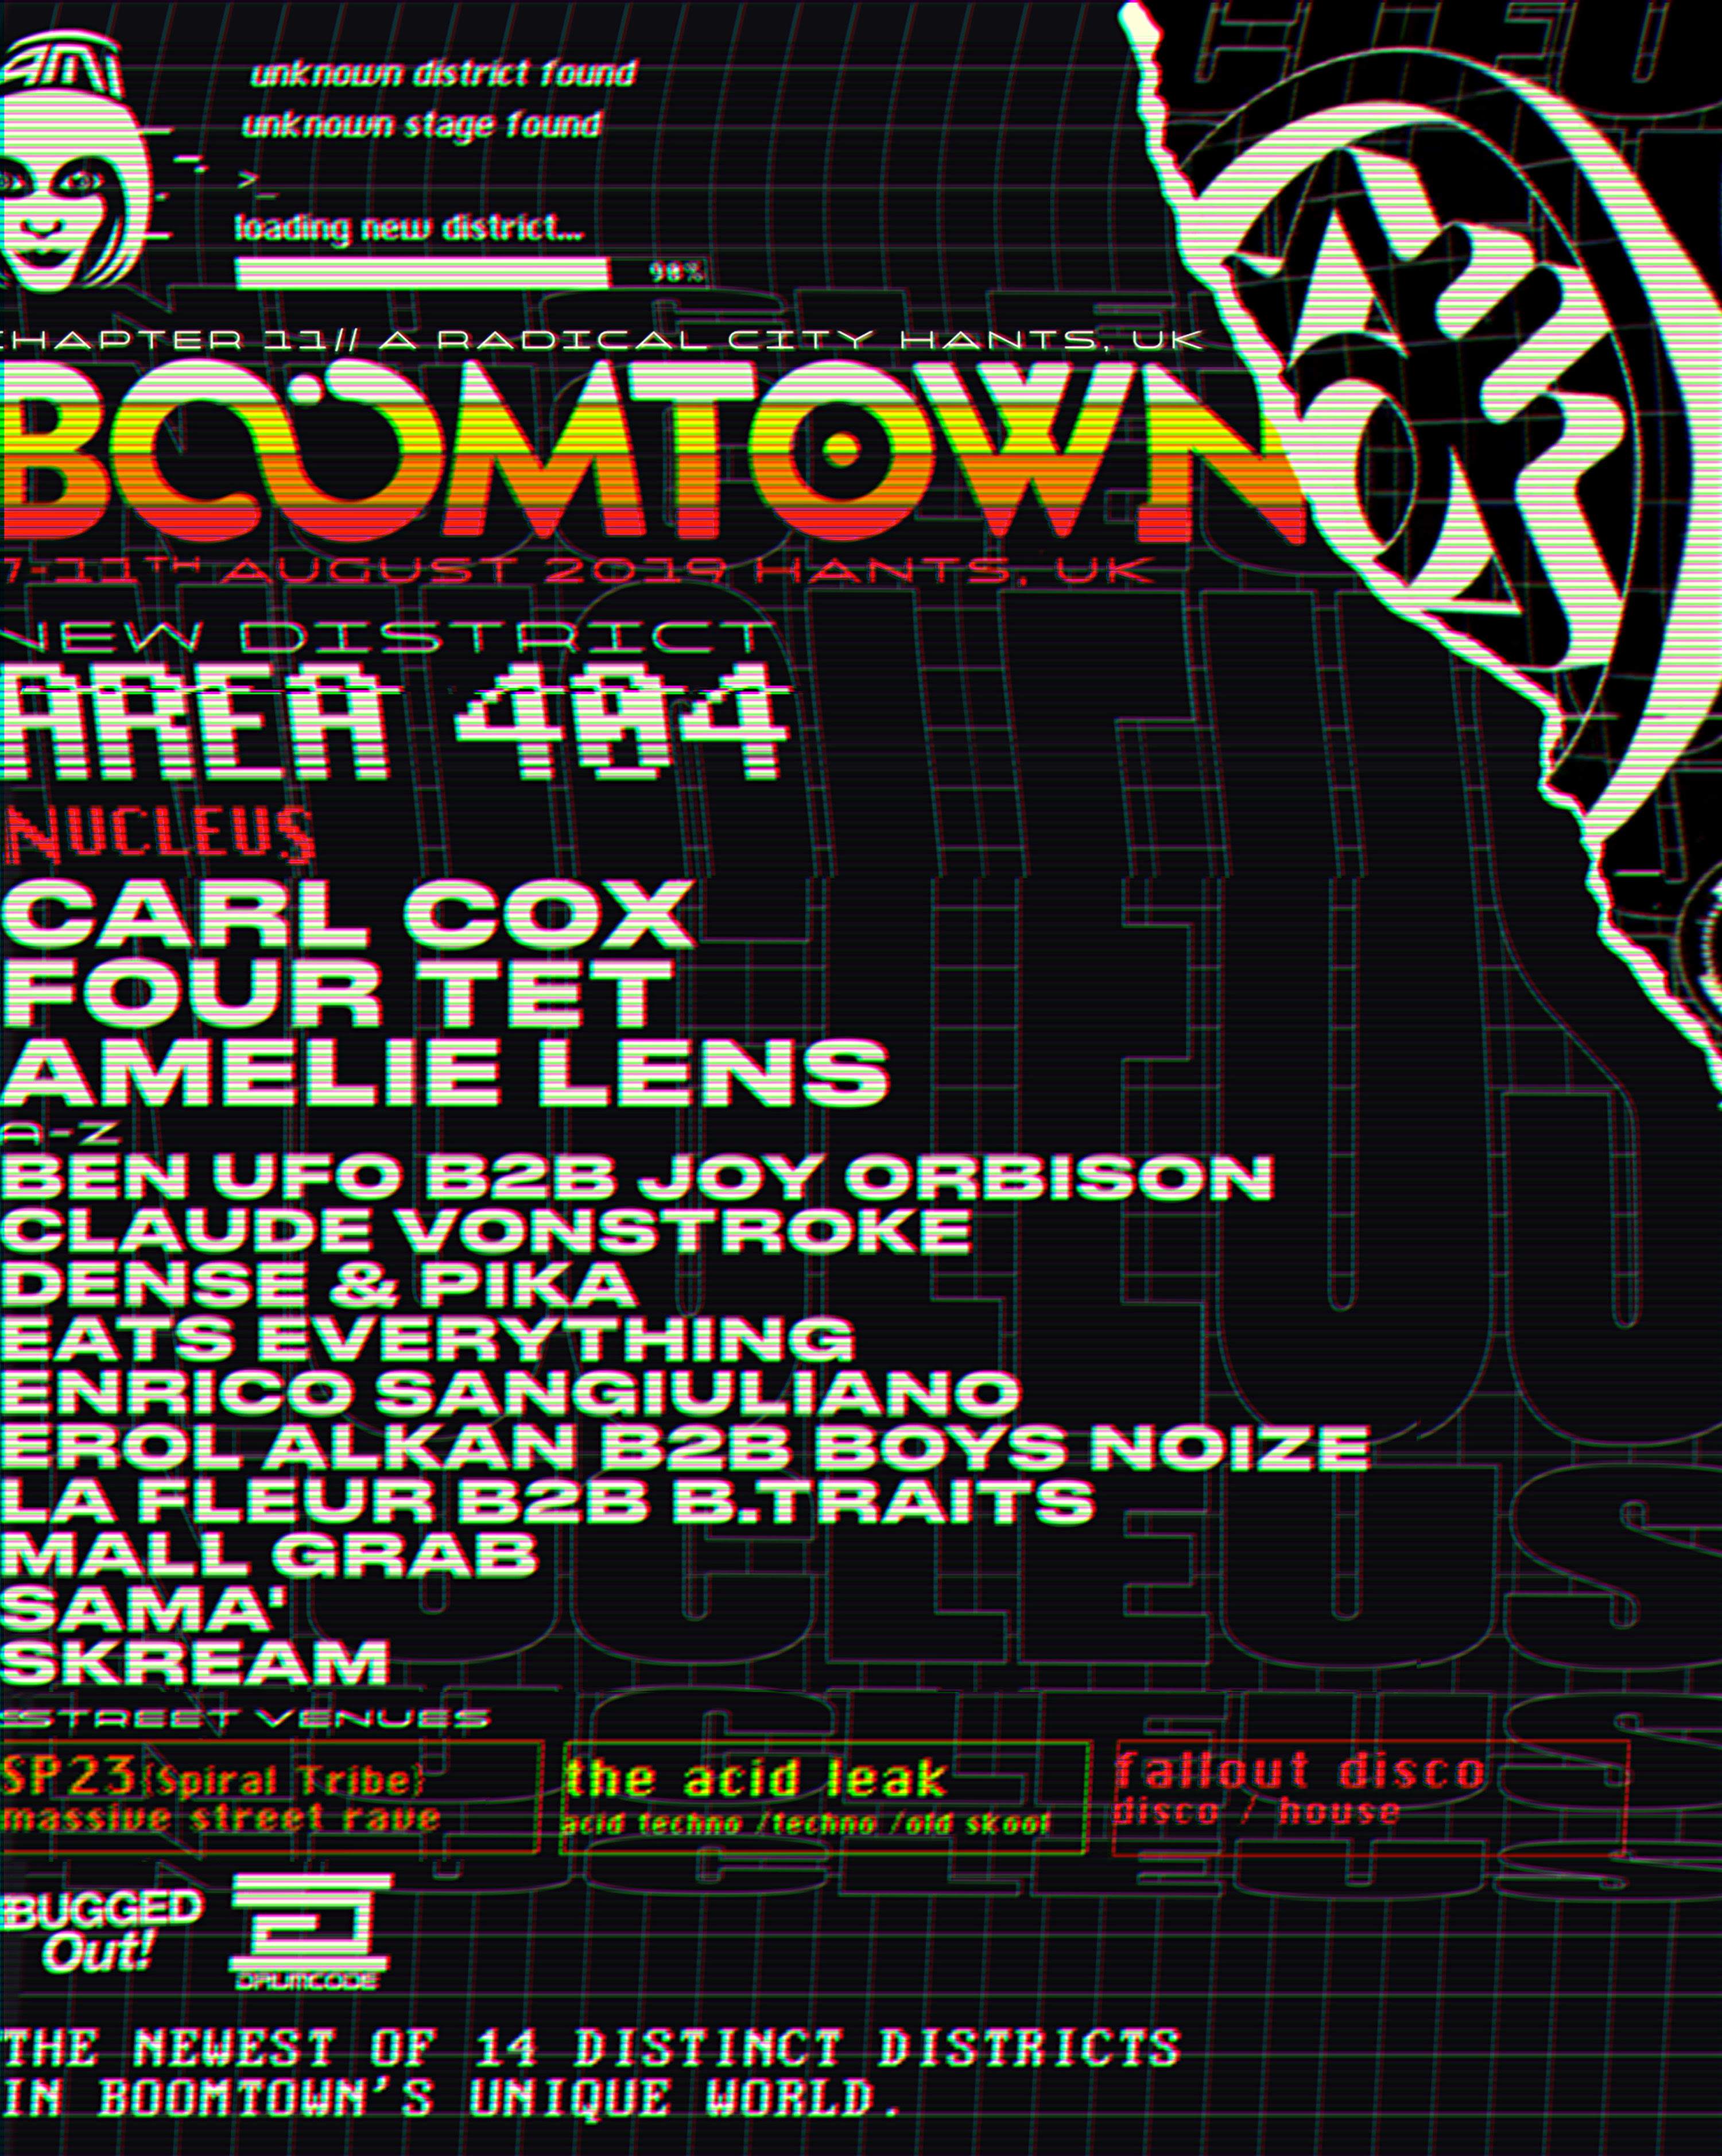 Four Tet, Carl Cox and Amelie Lens headline Boomtown's new 'Area 404' image